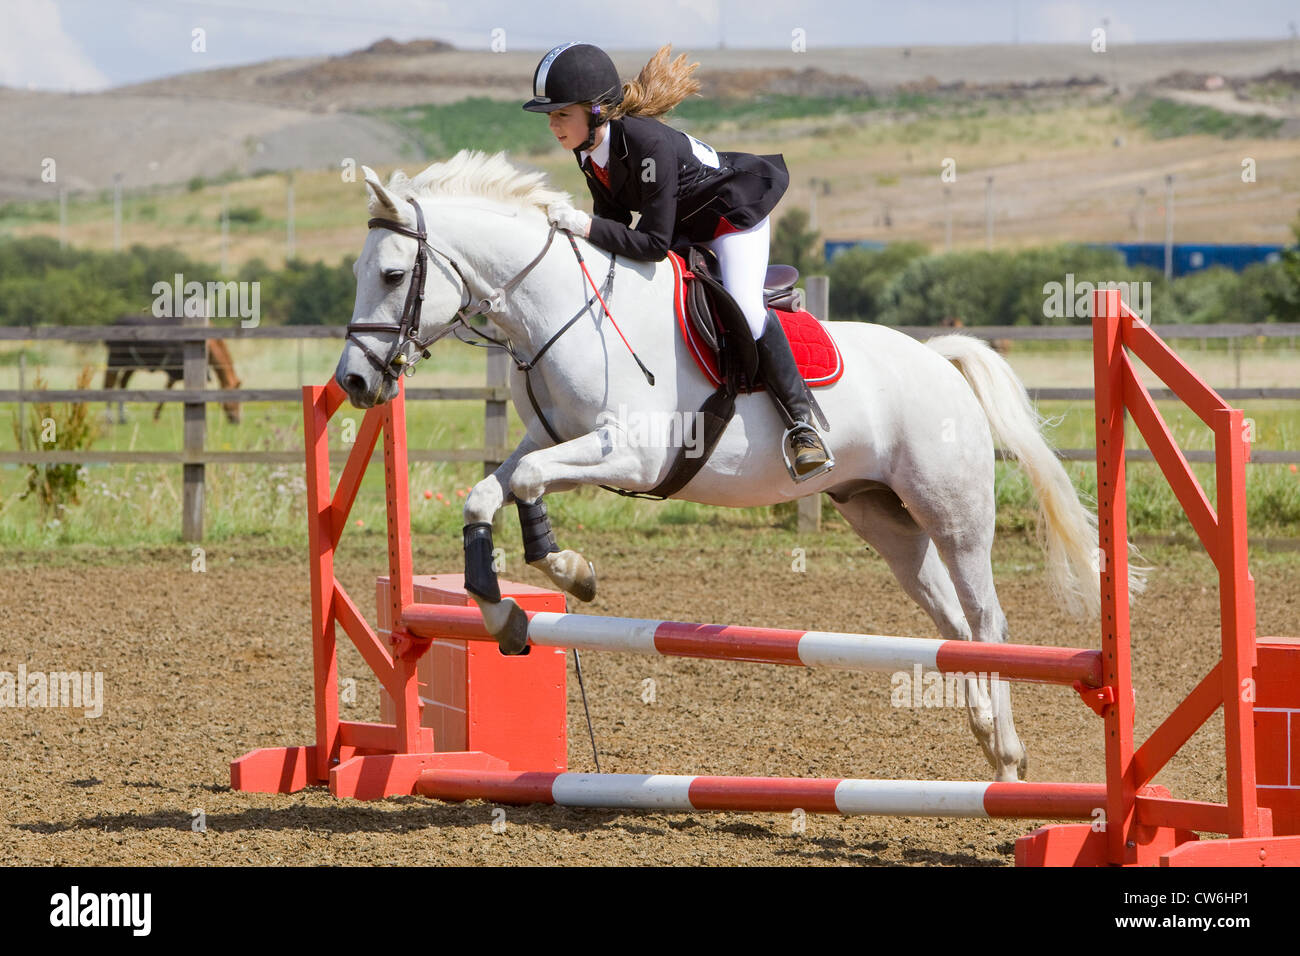 A horse and rider jumping a fence during a show jumping competition Stock Photo